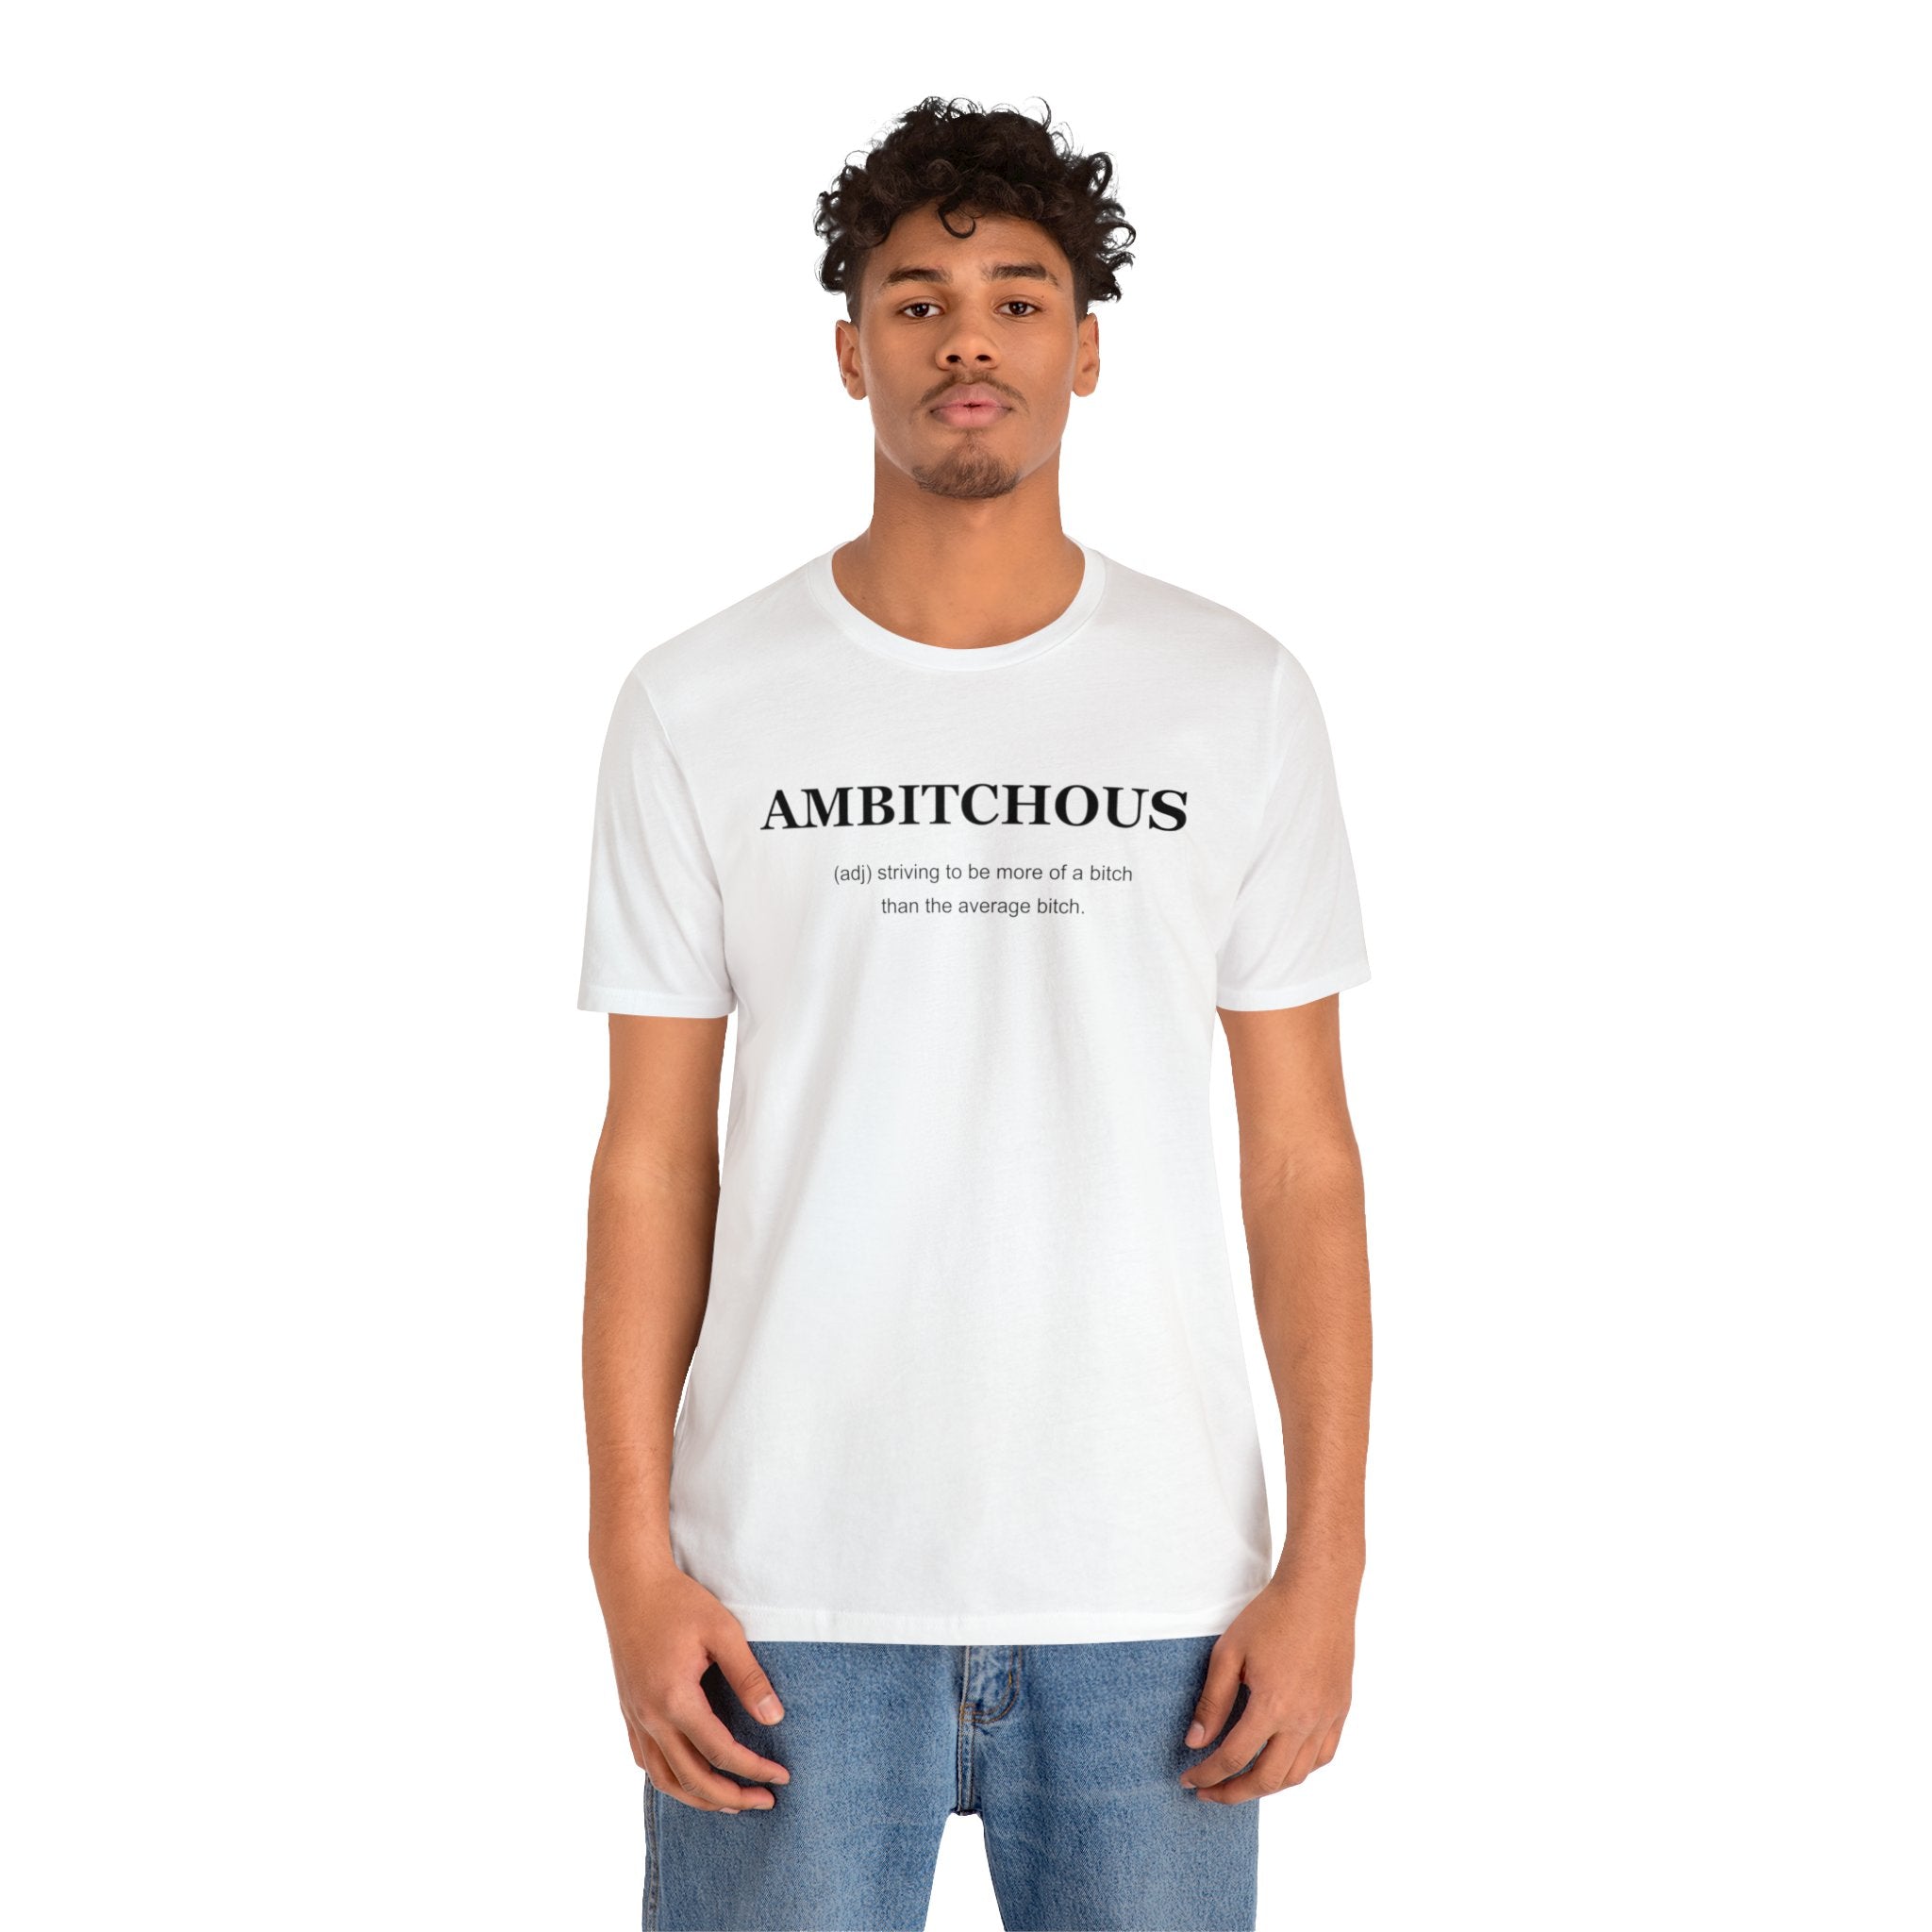 A man wearing an empowering white Ambitchious T Shirt.